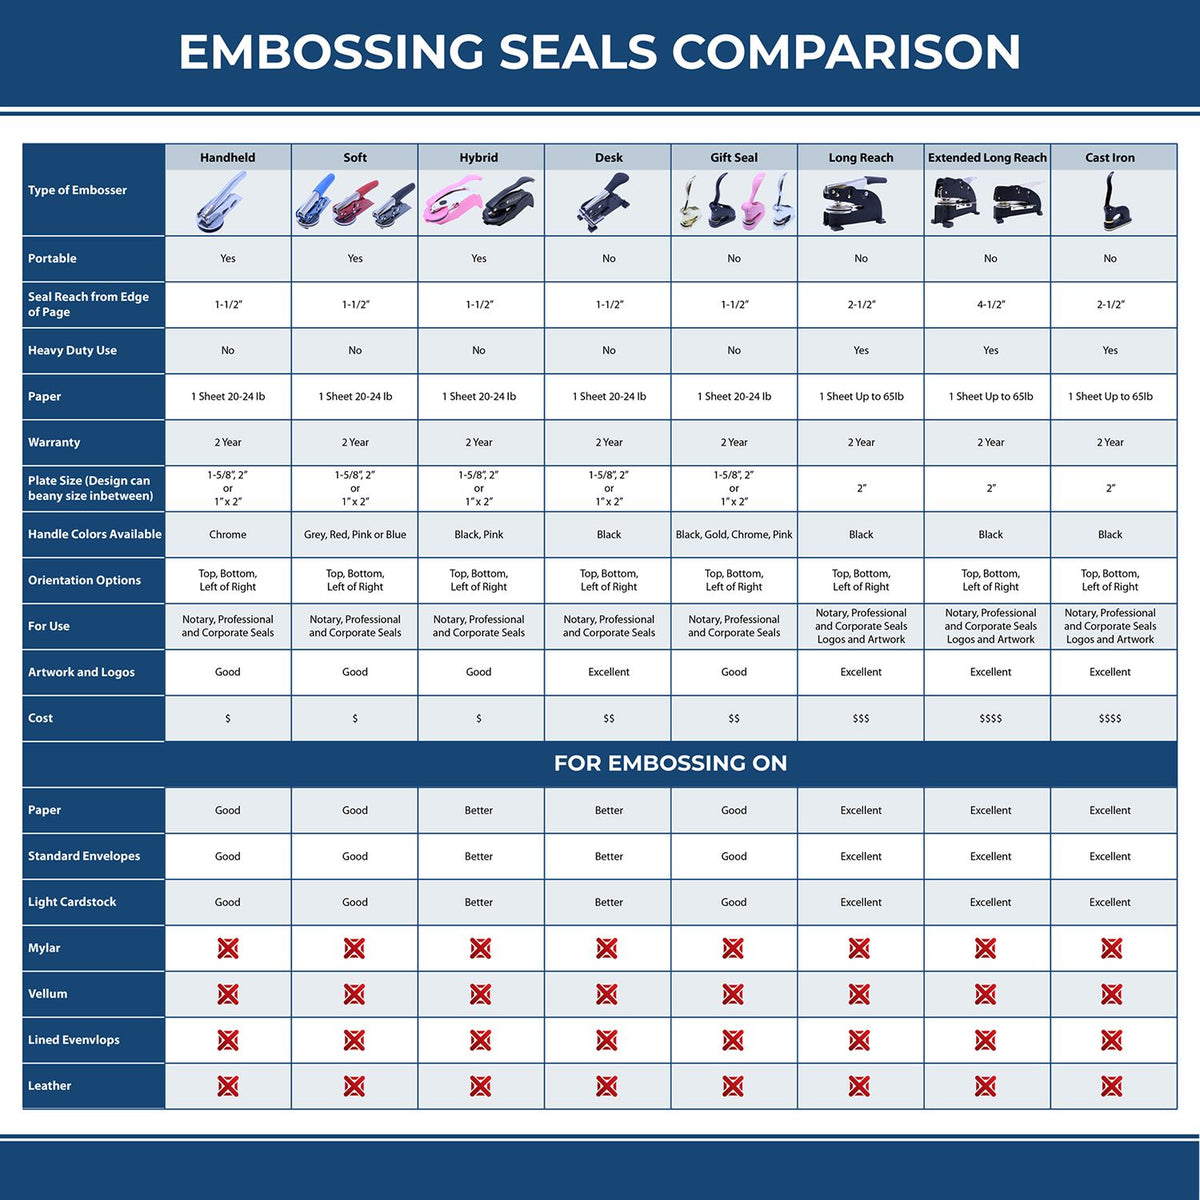 A comparison chart for the different types of mount models available for the Tennessee Desk Architect Embossing Seal.